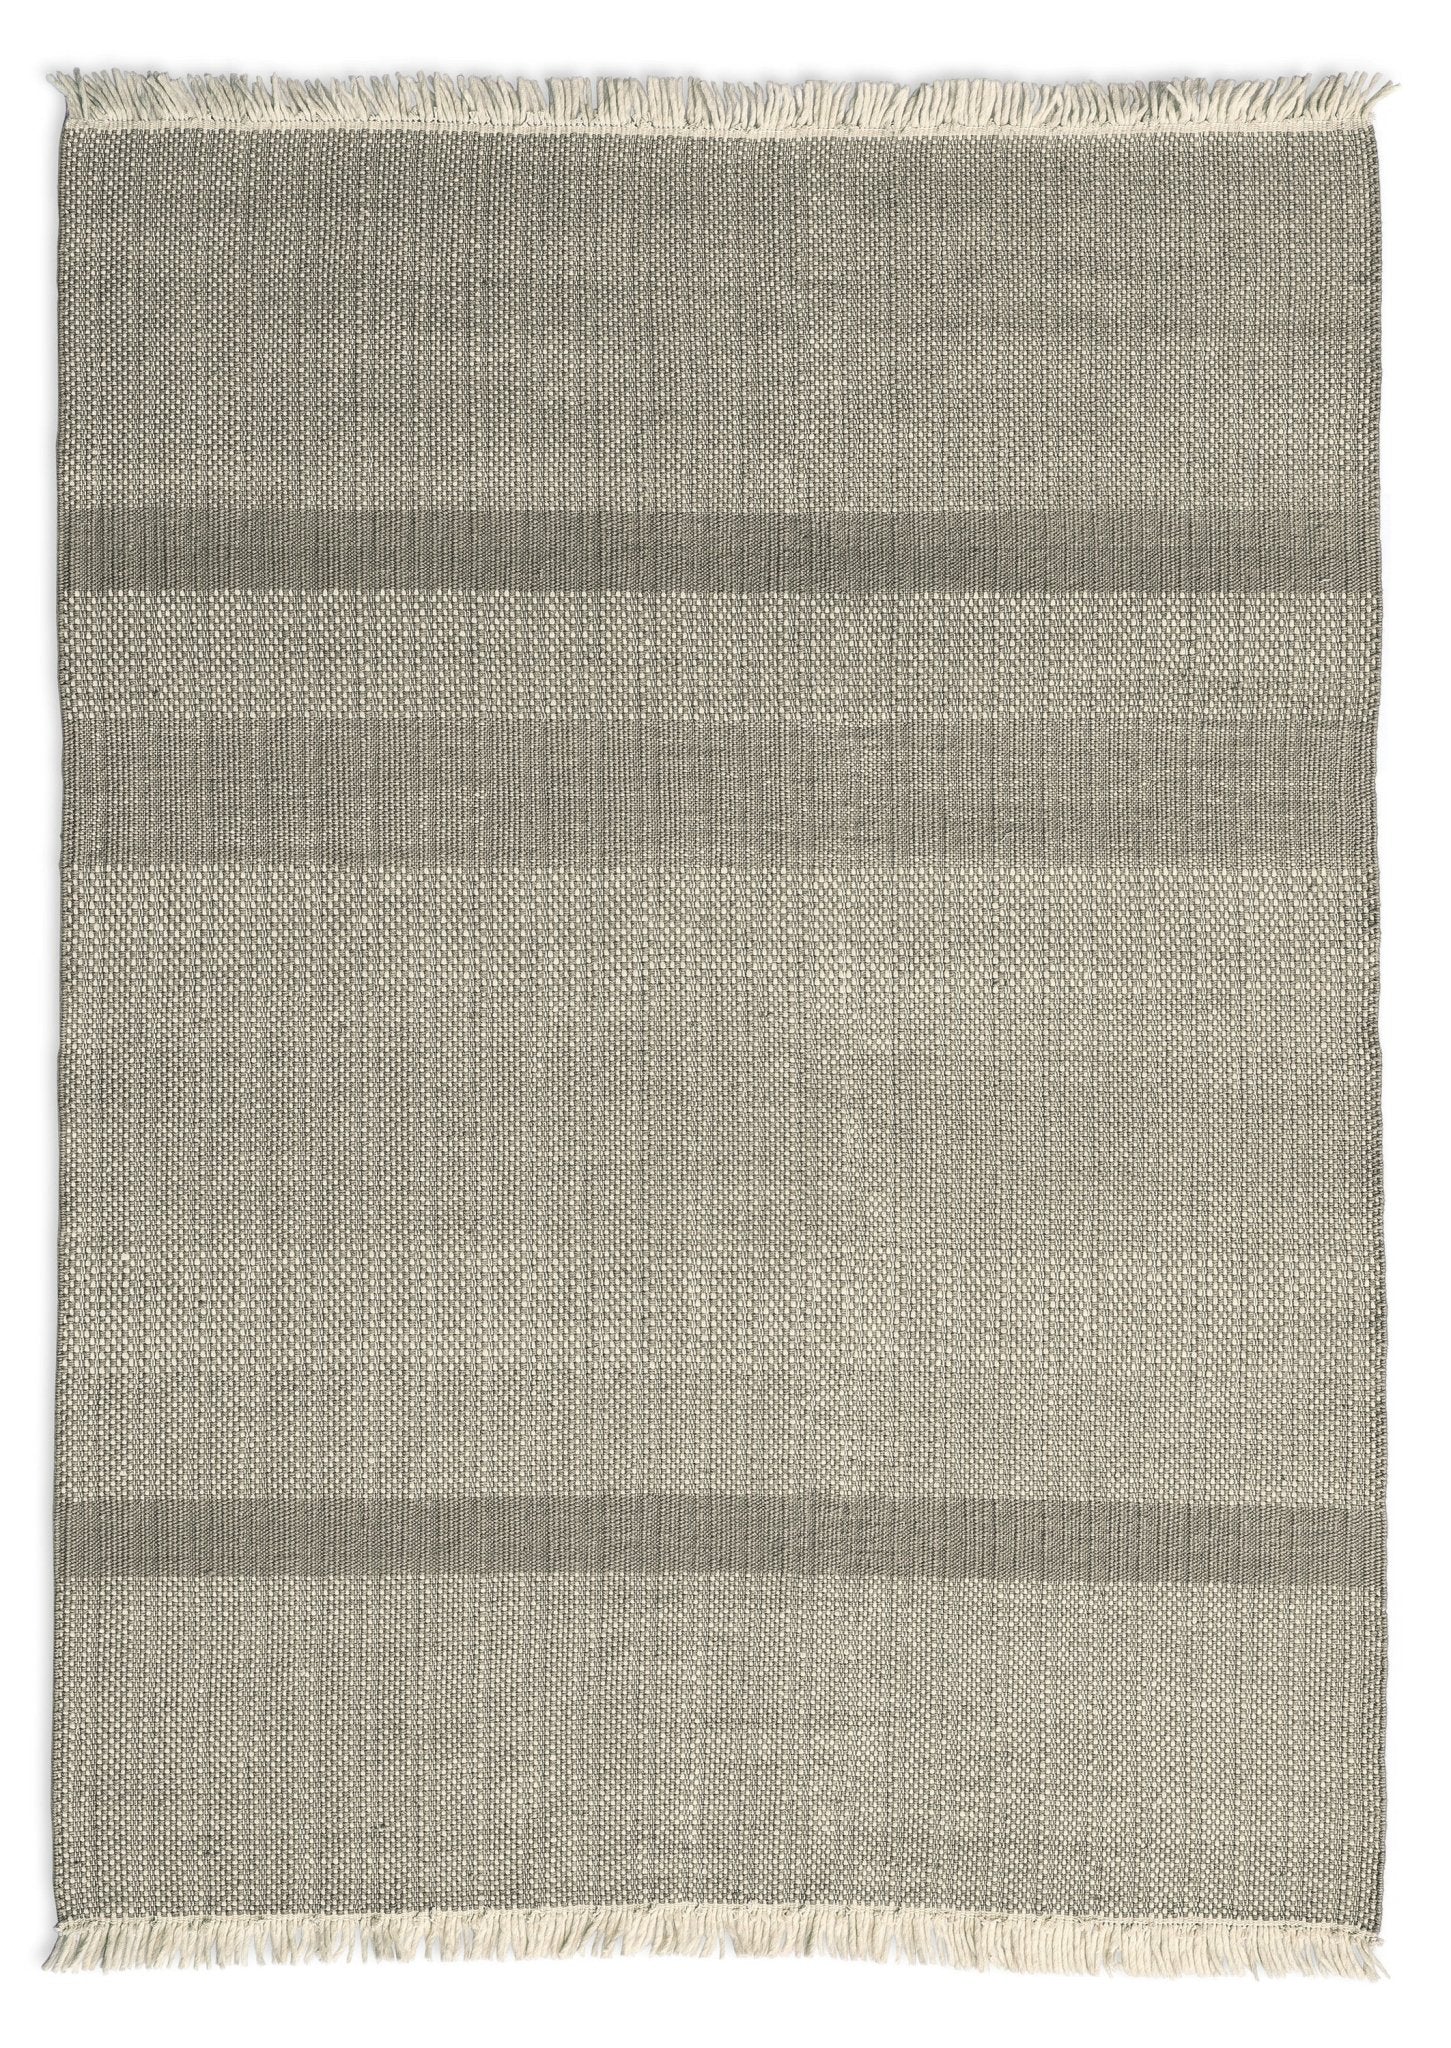 Tres Textured Rug - 9'10"x13'1" / Pearl